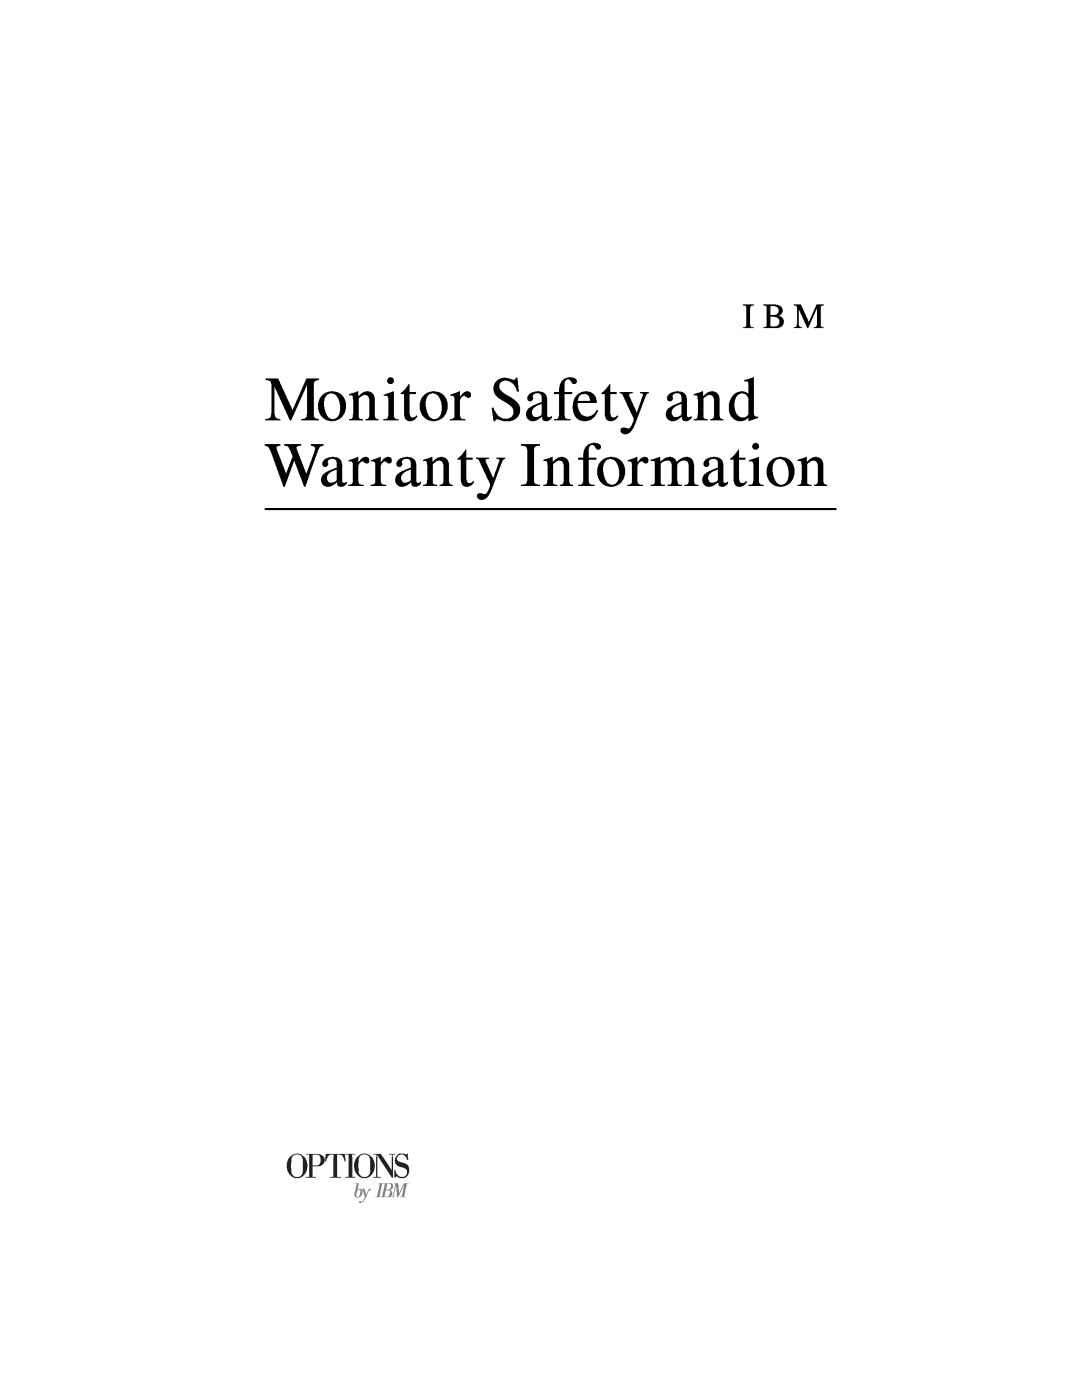 IBM 6331-J1N, 6331-H1N, 31P6241, 31P6240 manual Monitor Safety and Warranty Information, Options, by IBM 